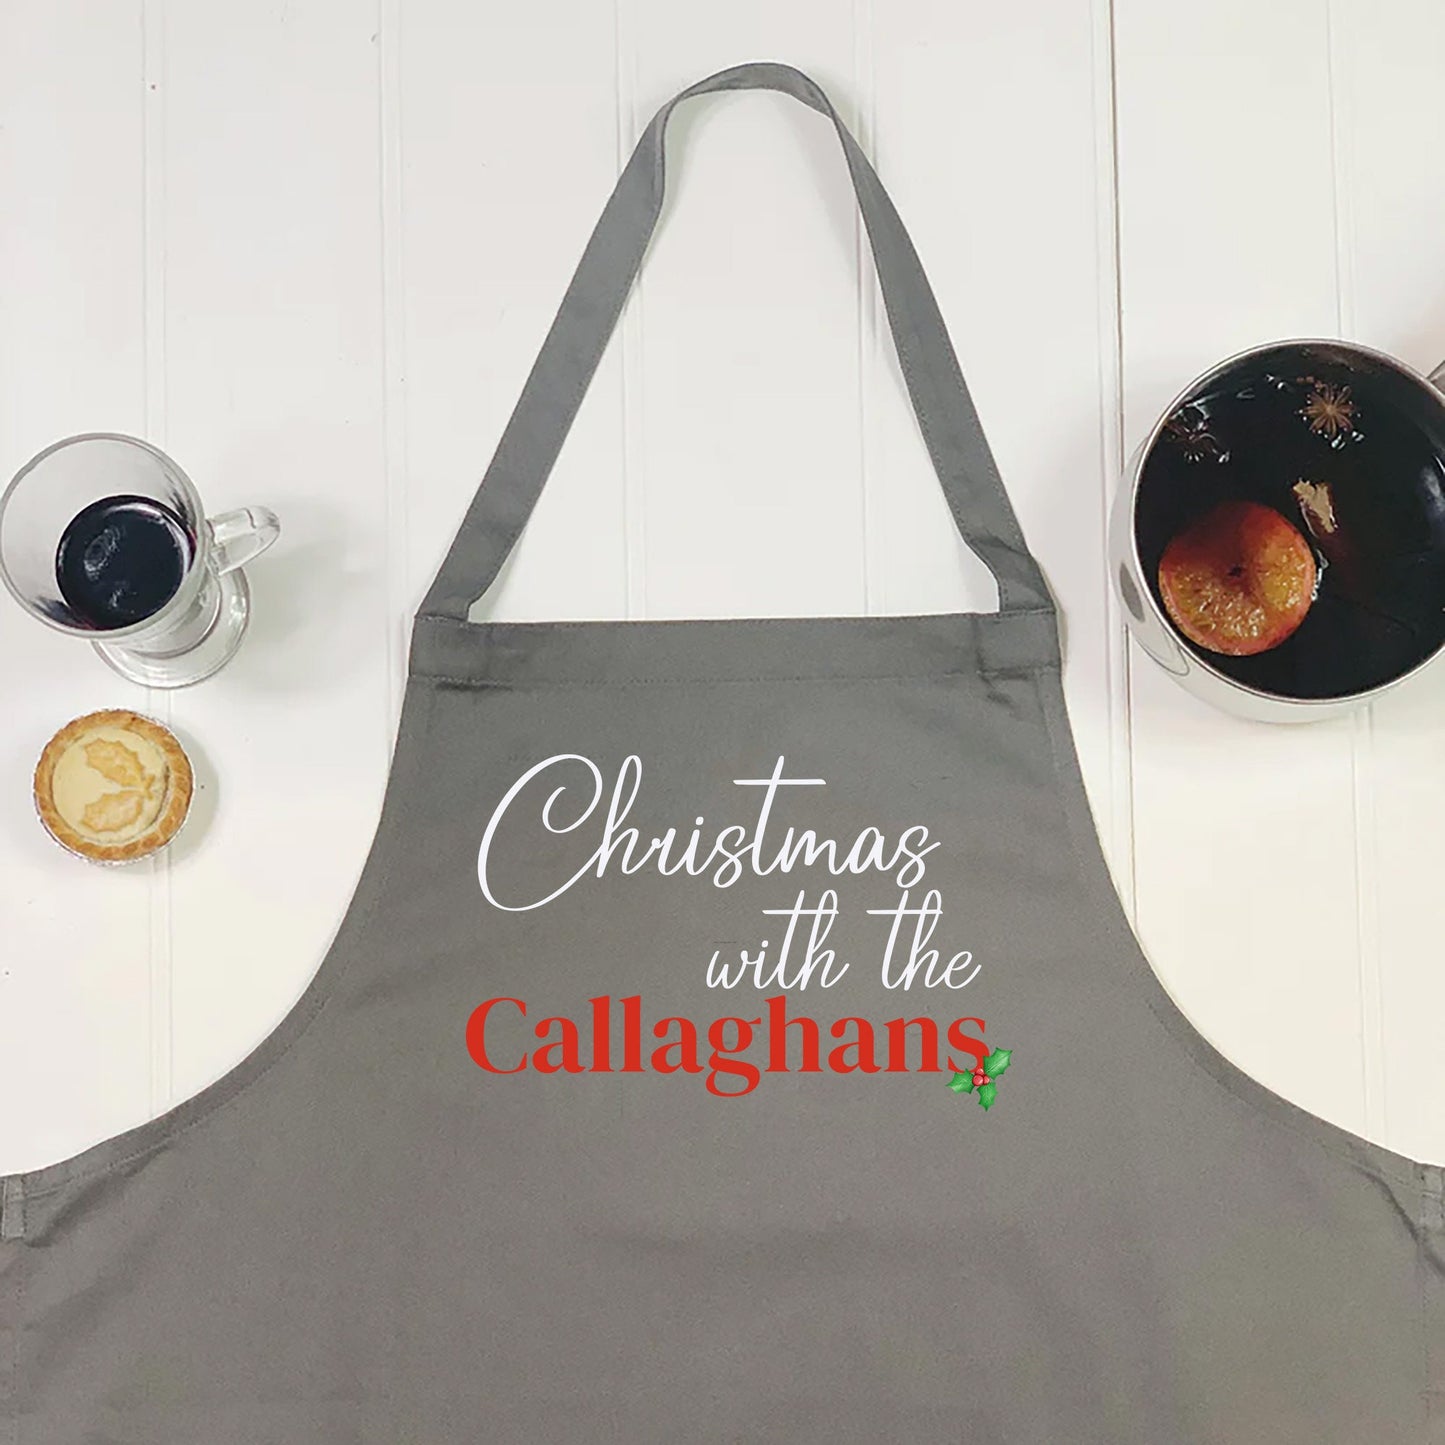 Personalised Kitchen Cooking Apron, Printed Kitchen Apron, Secret Santa Gift for Dad Grandad, Brother, Uncle, Christmas with the family name